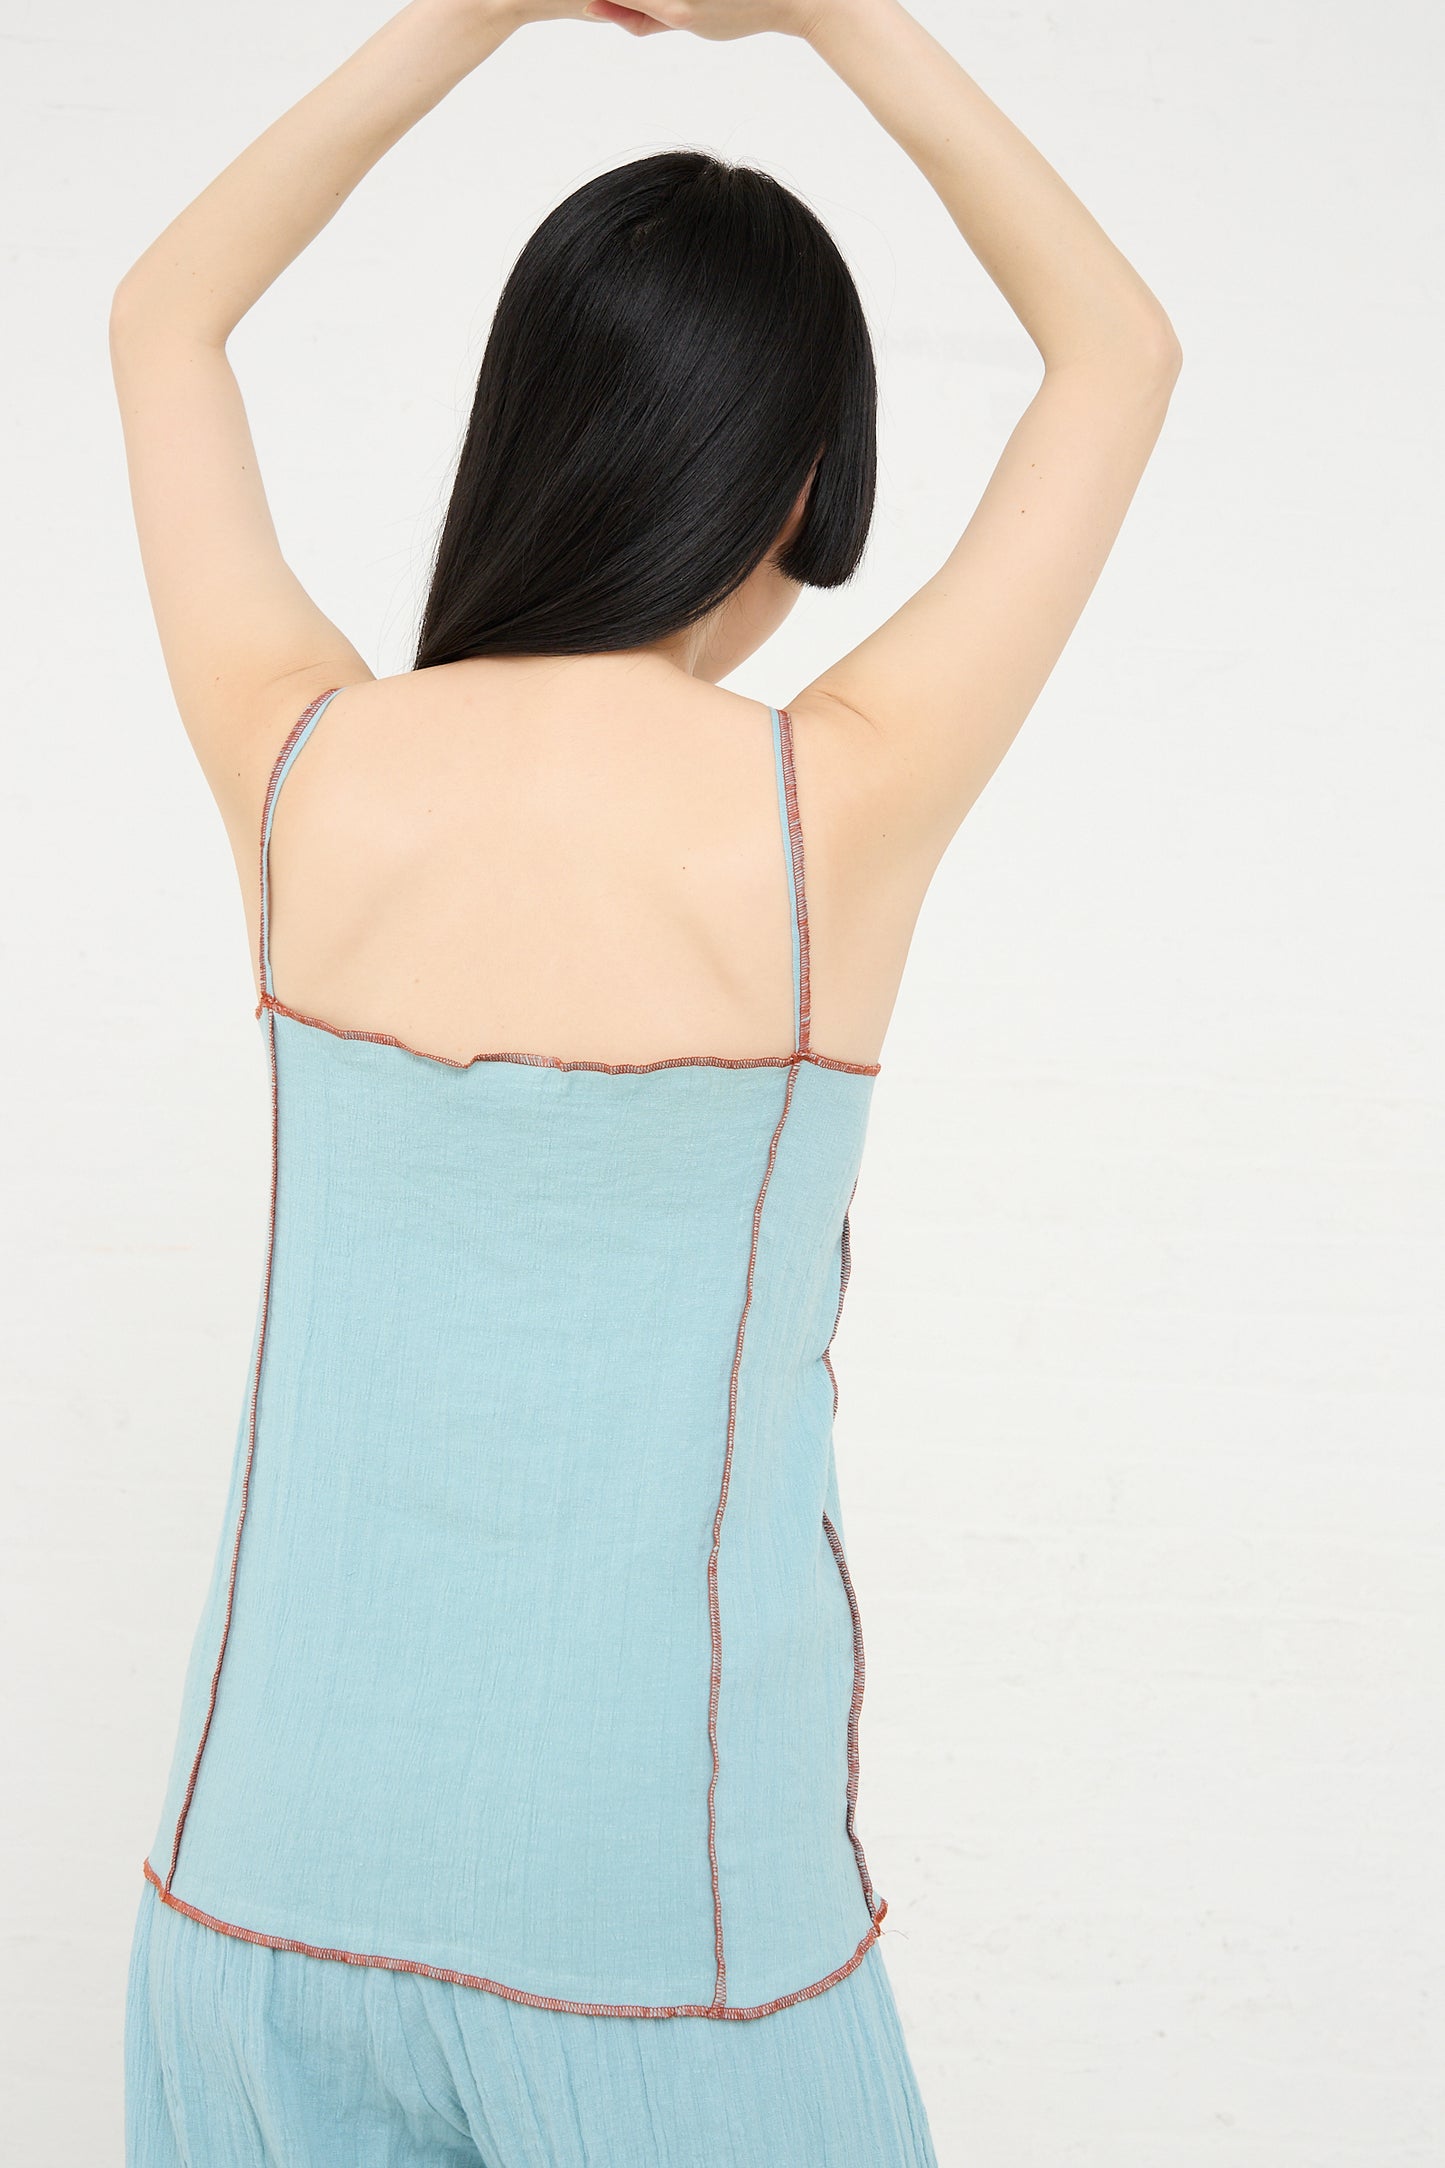 Woman seen from the back wearing a Baserange Shok Slip Top in Wuxi Blue with raised arms.